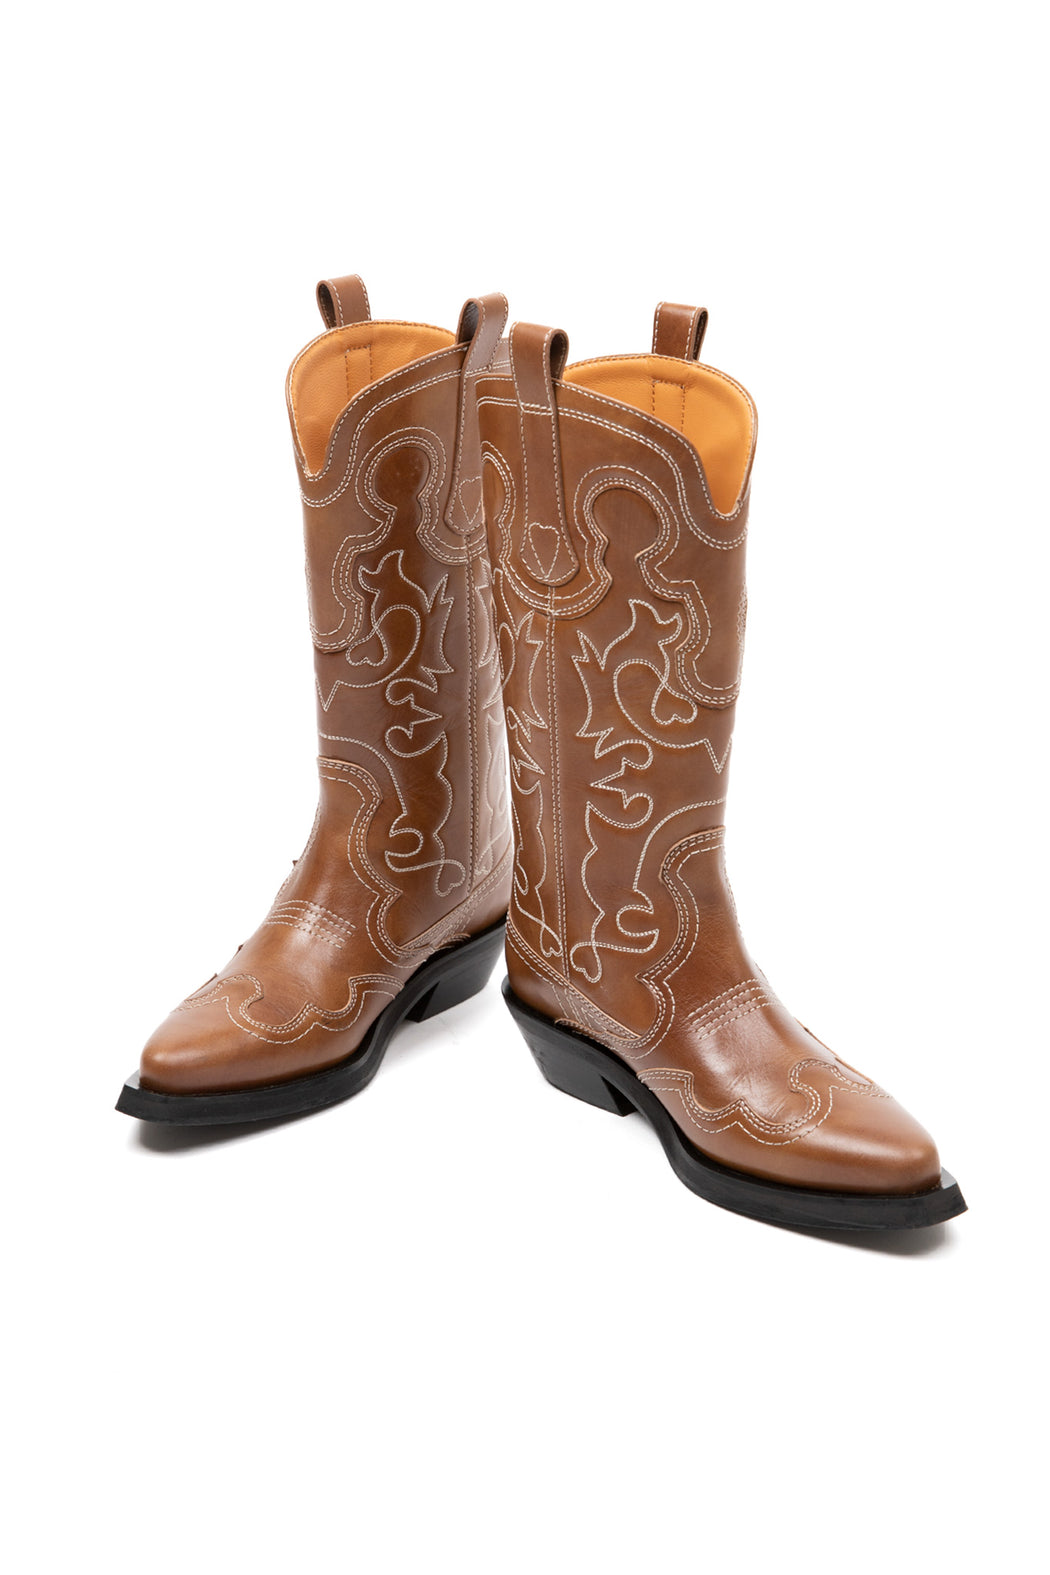 Ganni-Embroidered-Western-Boots-Tigers-Eye